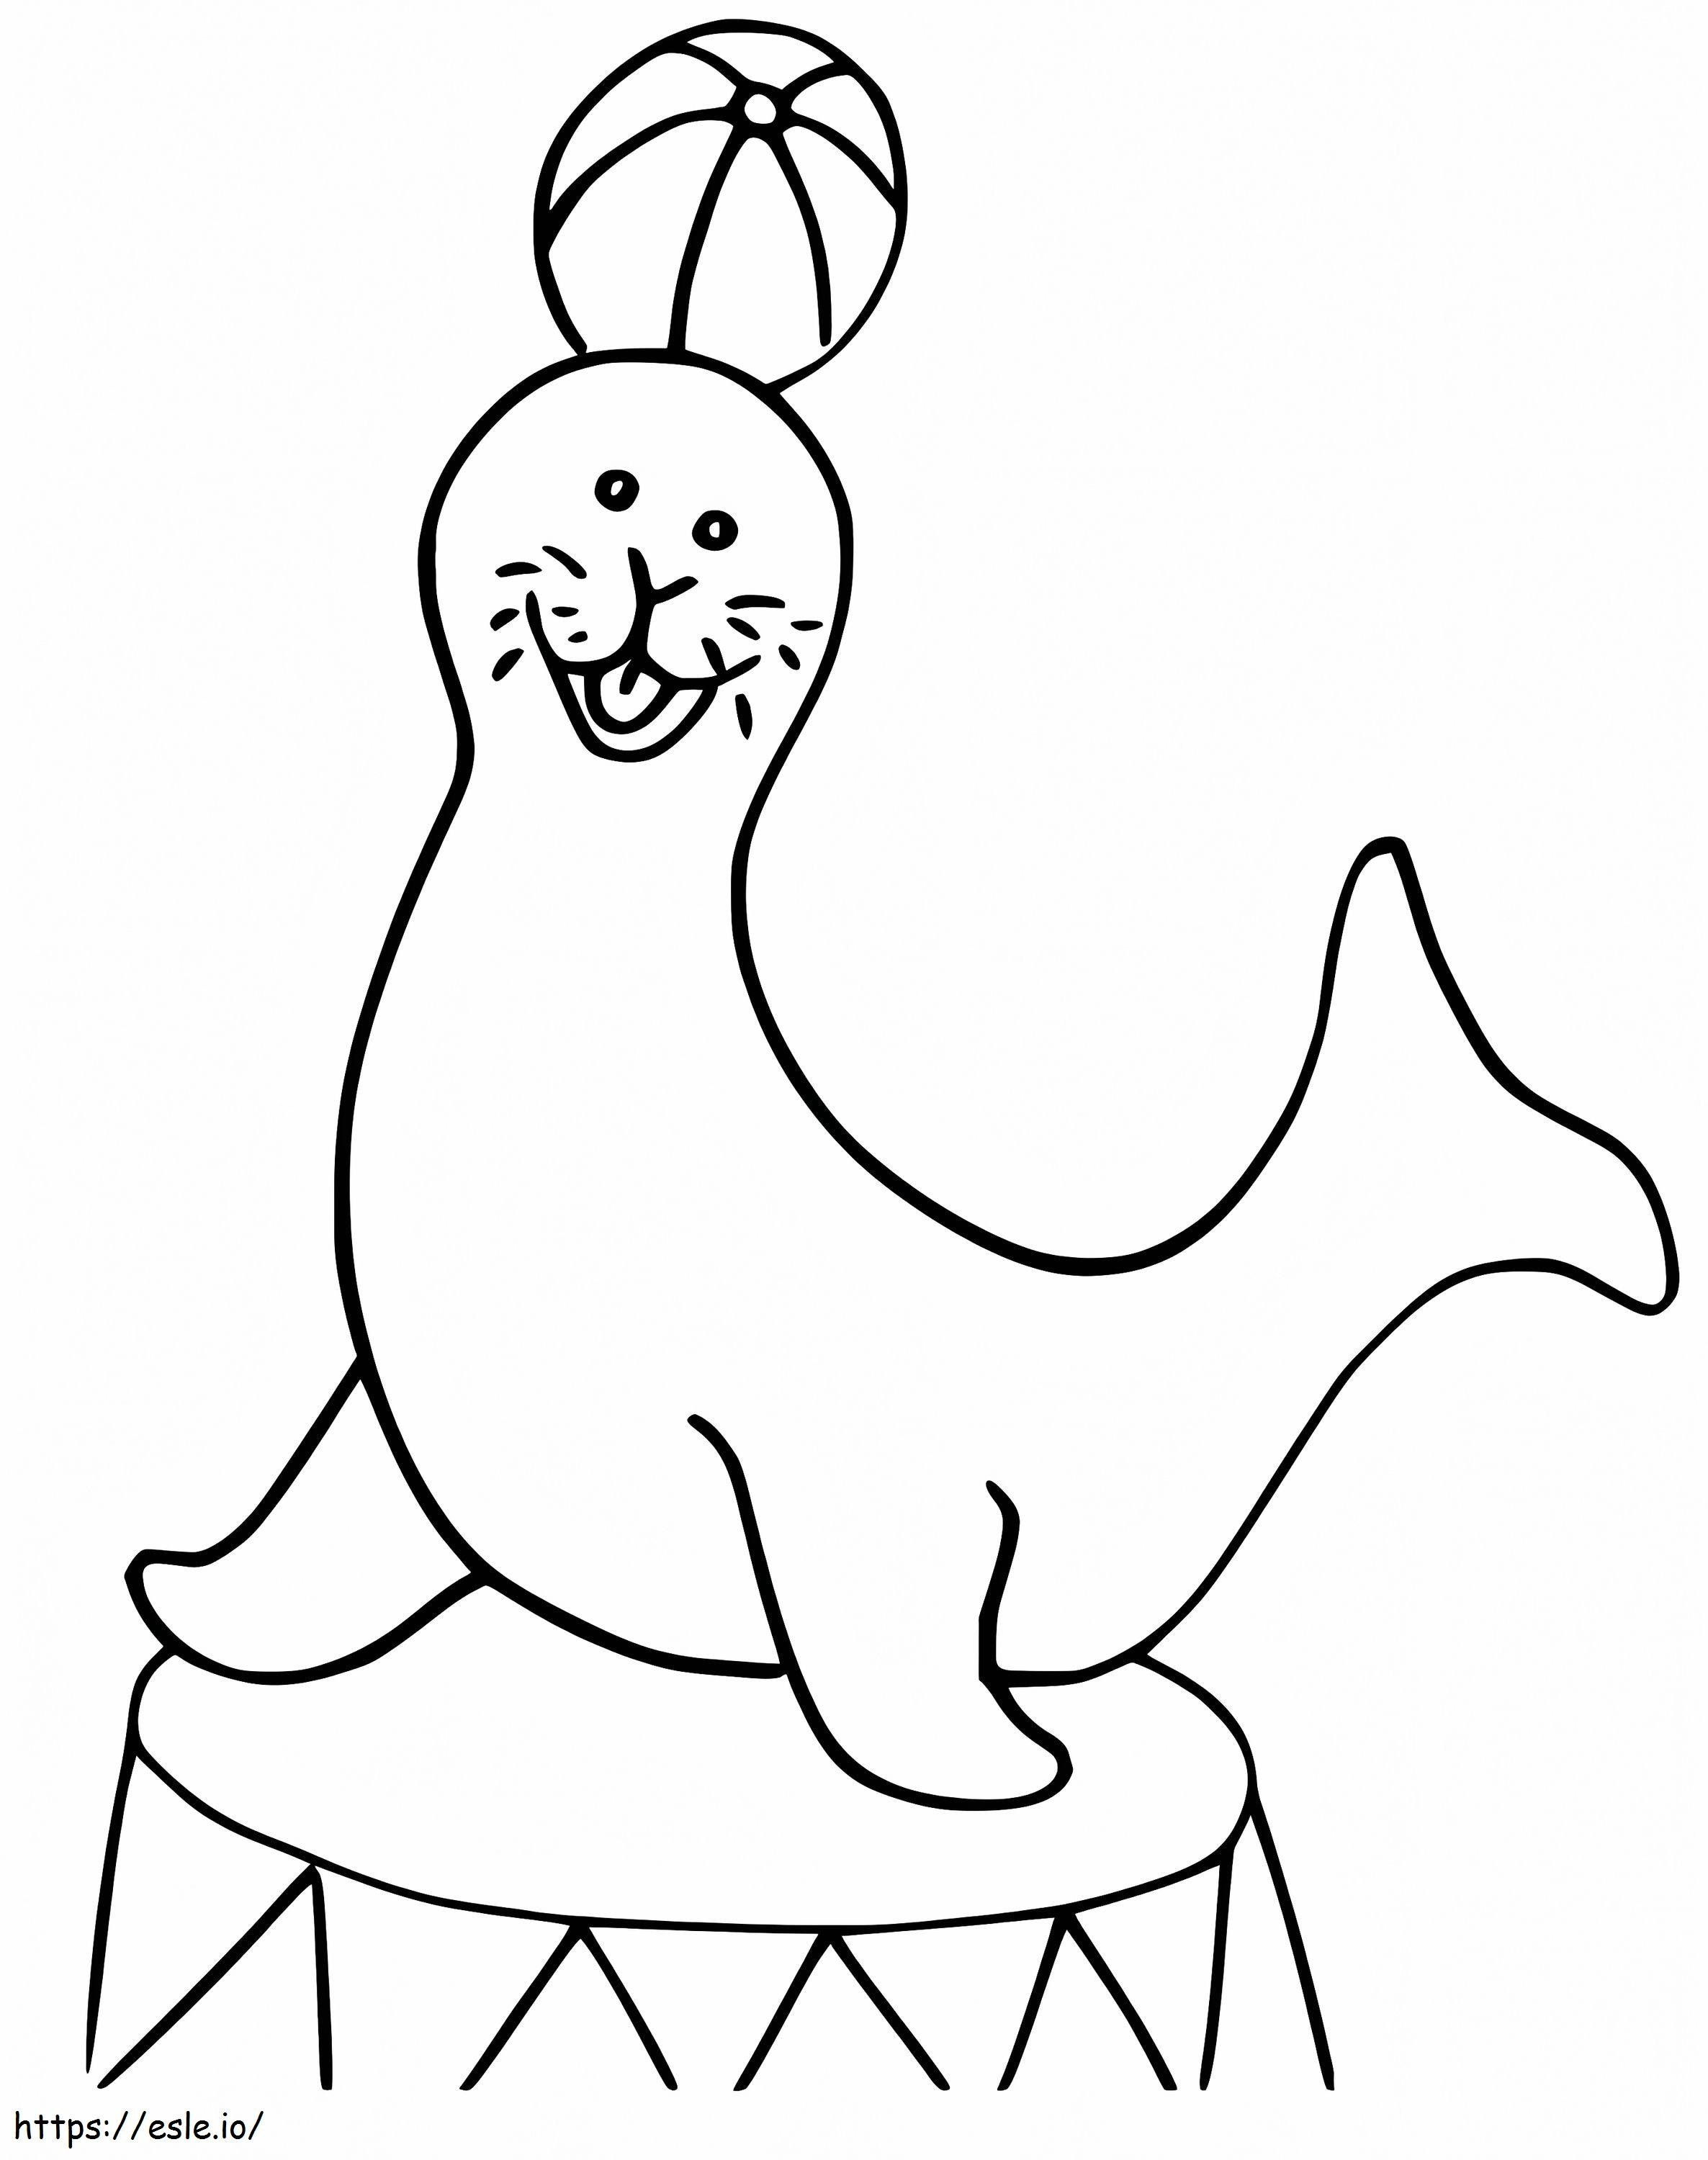 Funny Sea Lion coloring page